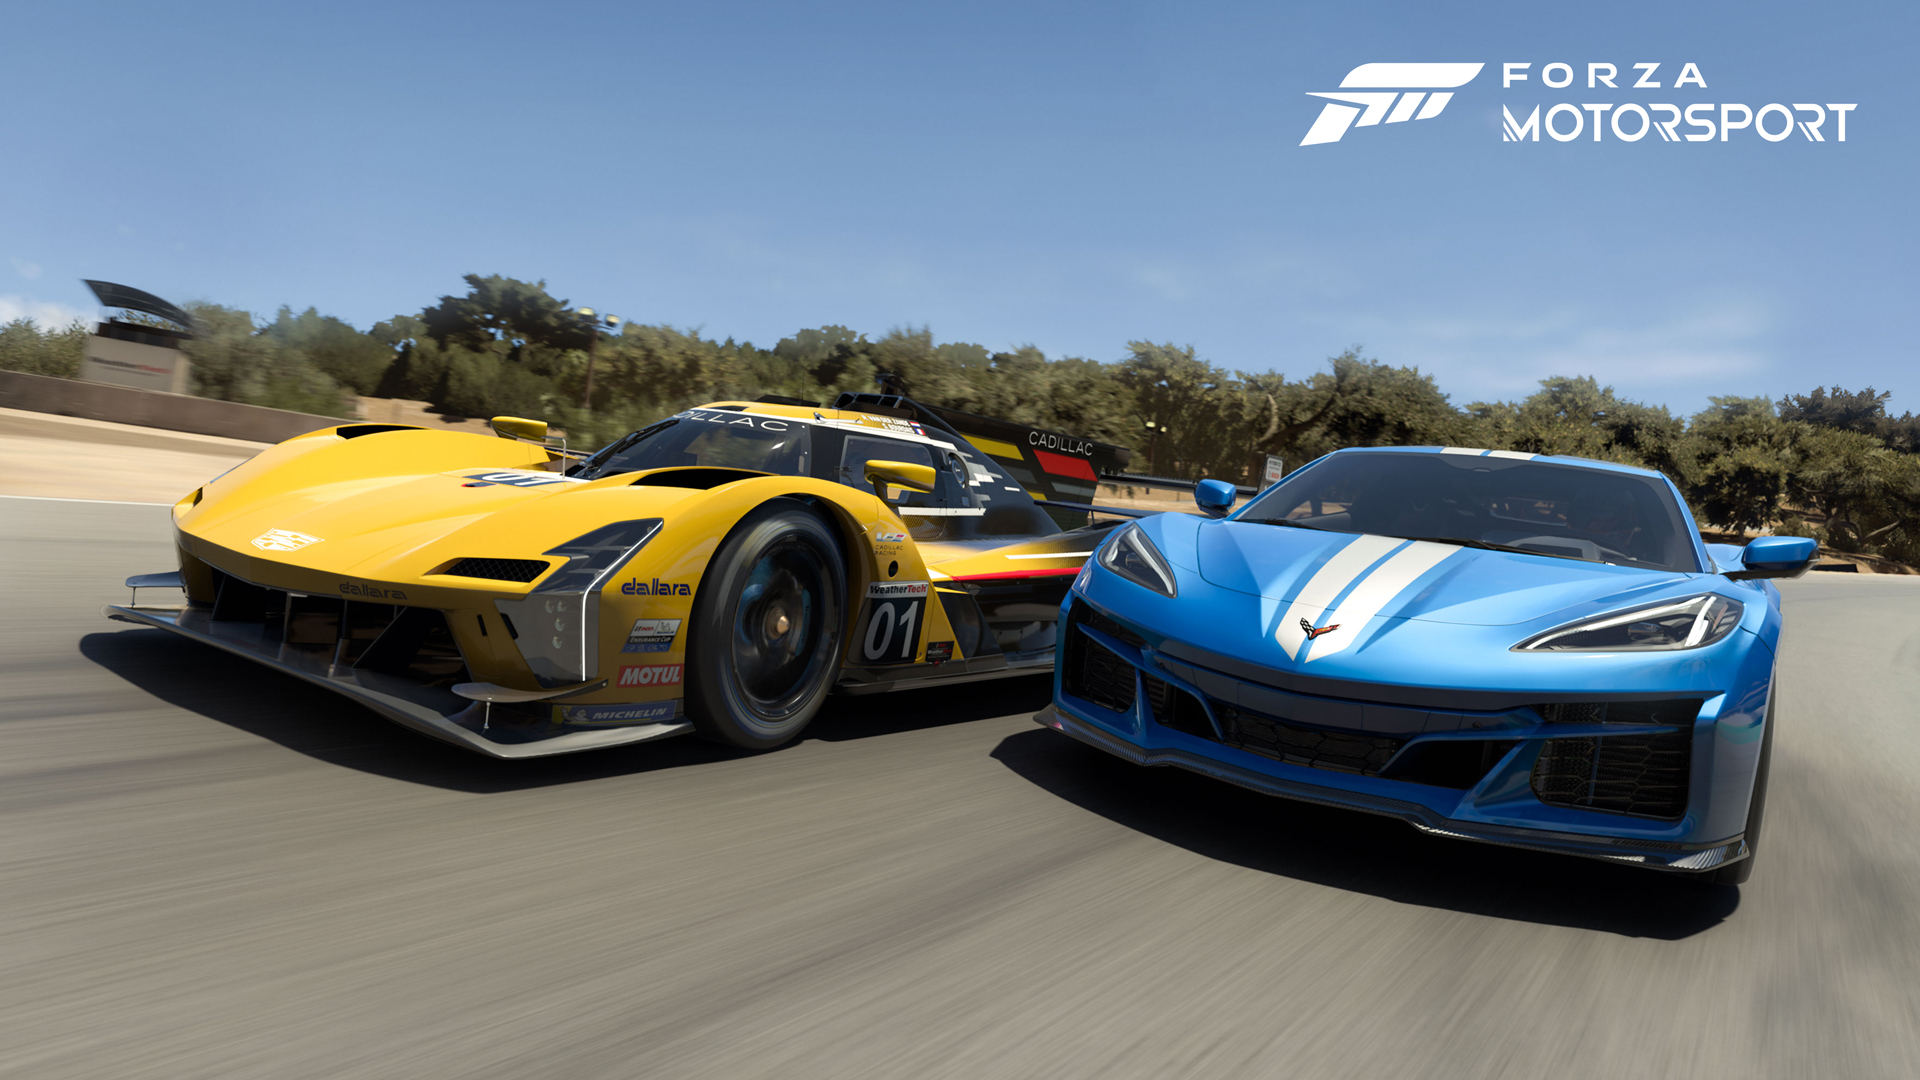 Forza Motorsport 7 PC review